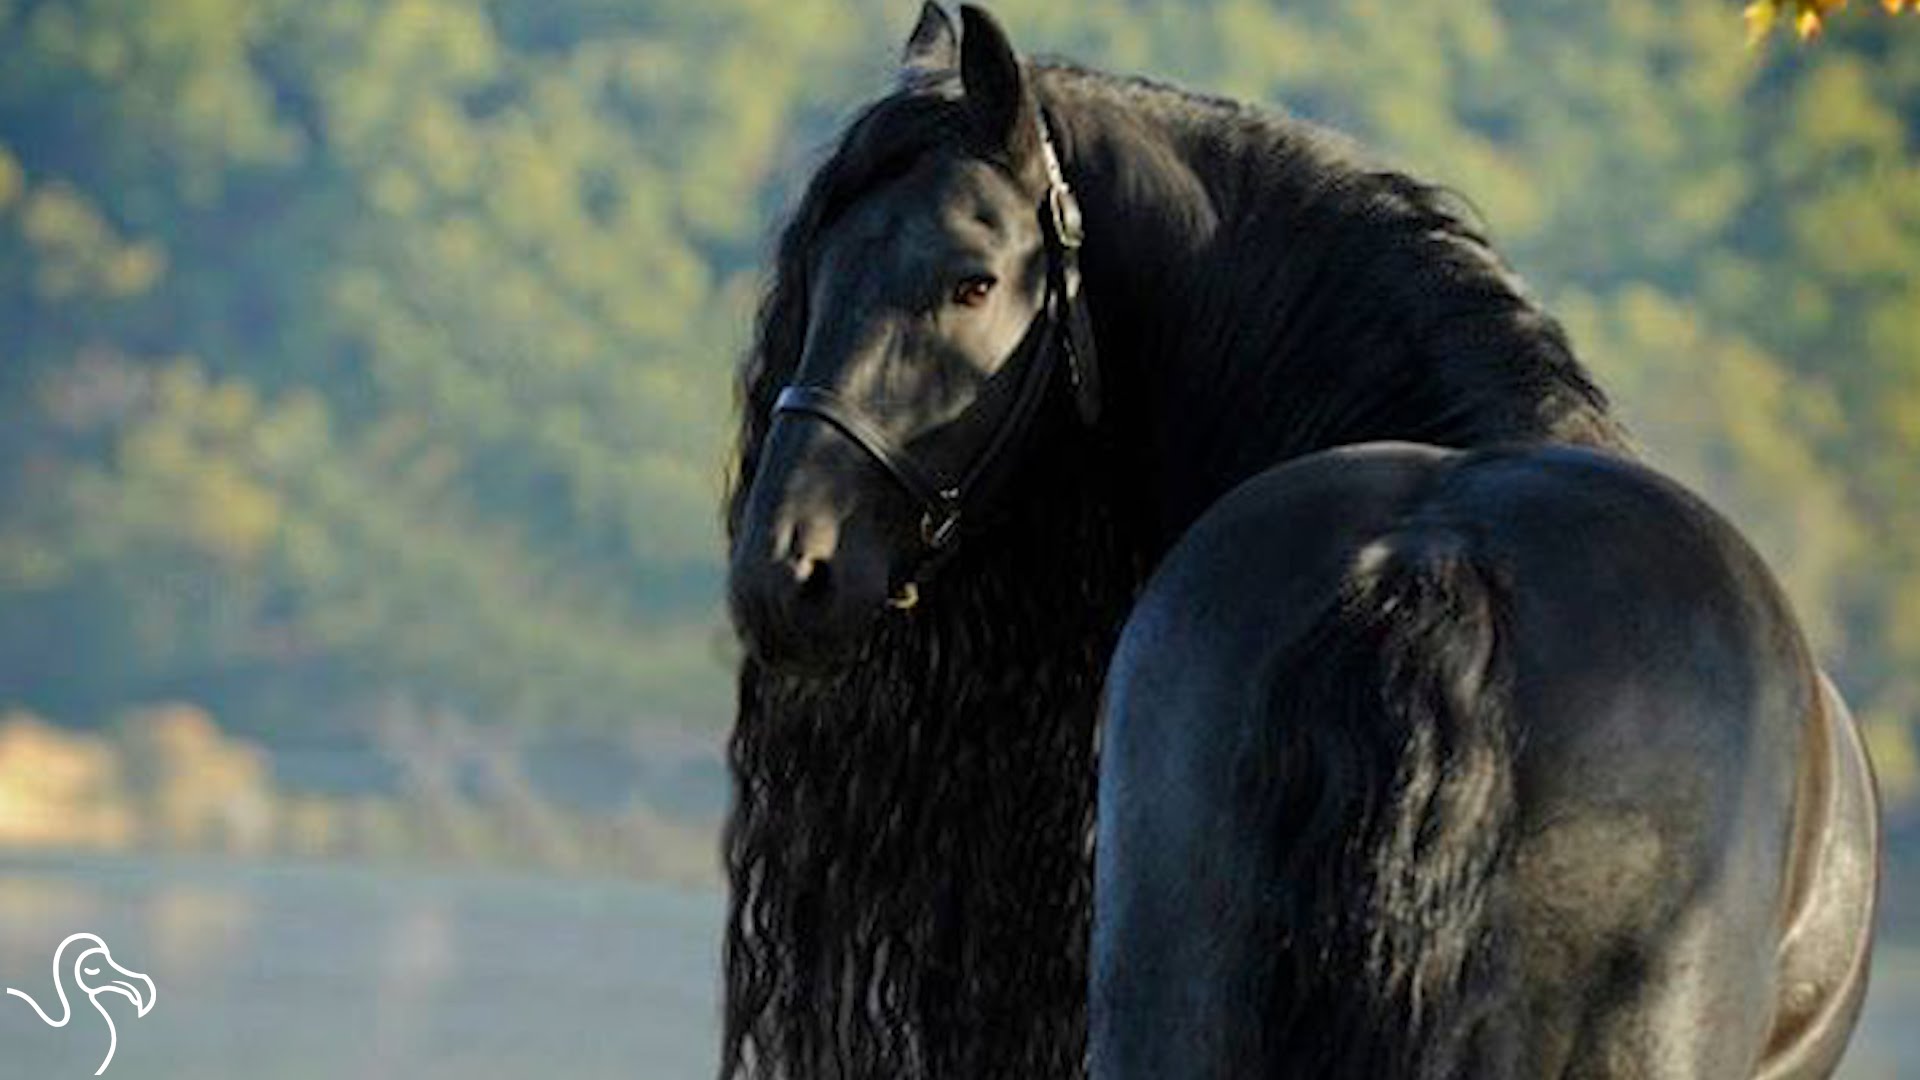 Meet The Horse With The World's Most Beautiful Hair - YouTube